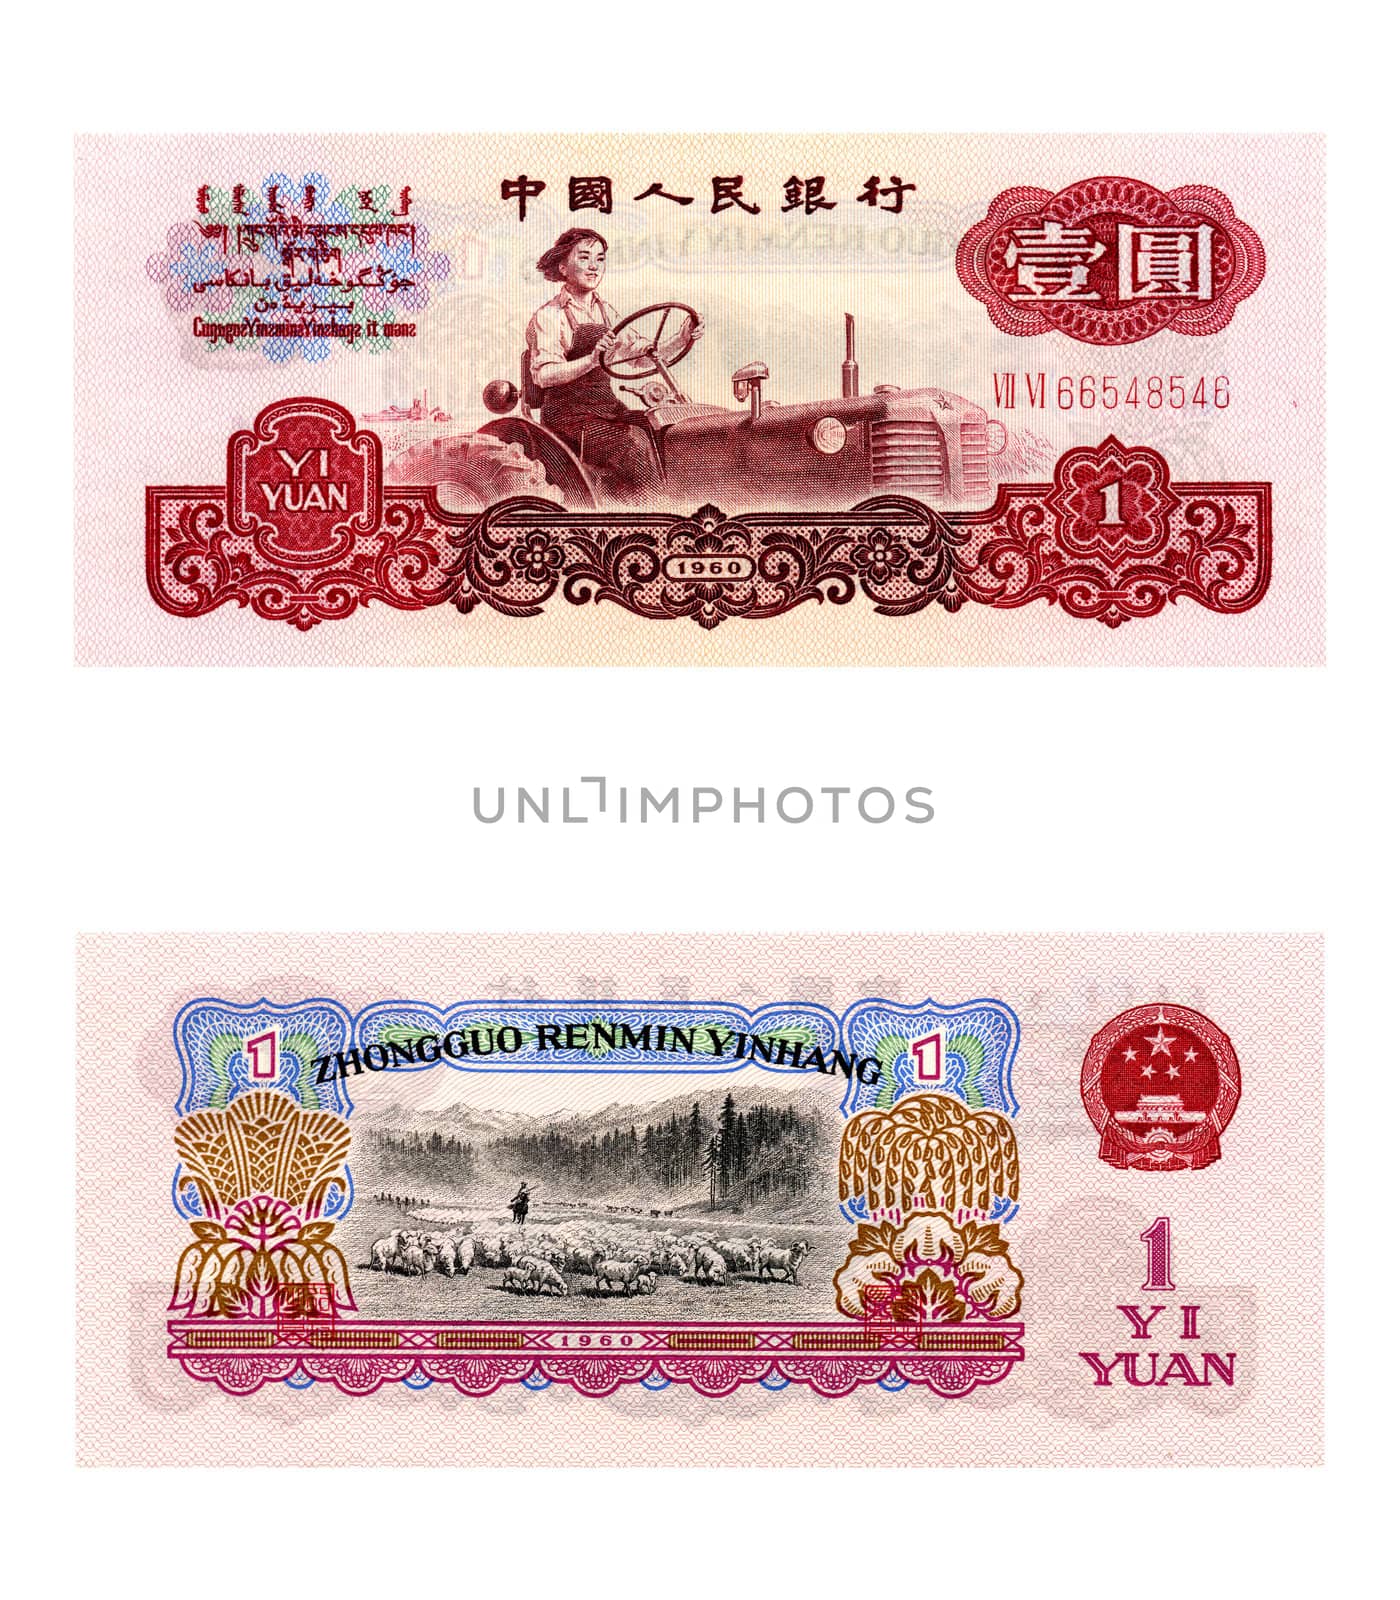 Chinese banknote by claudiodivizia